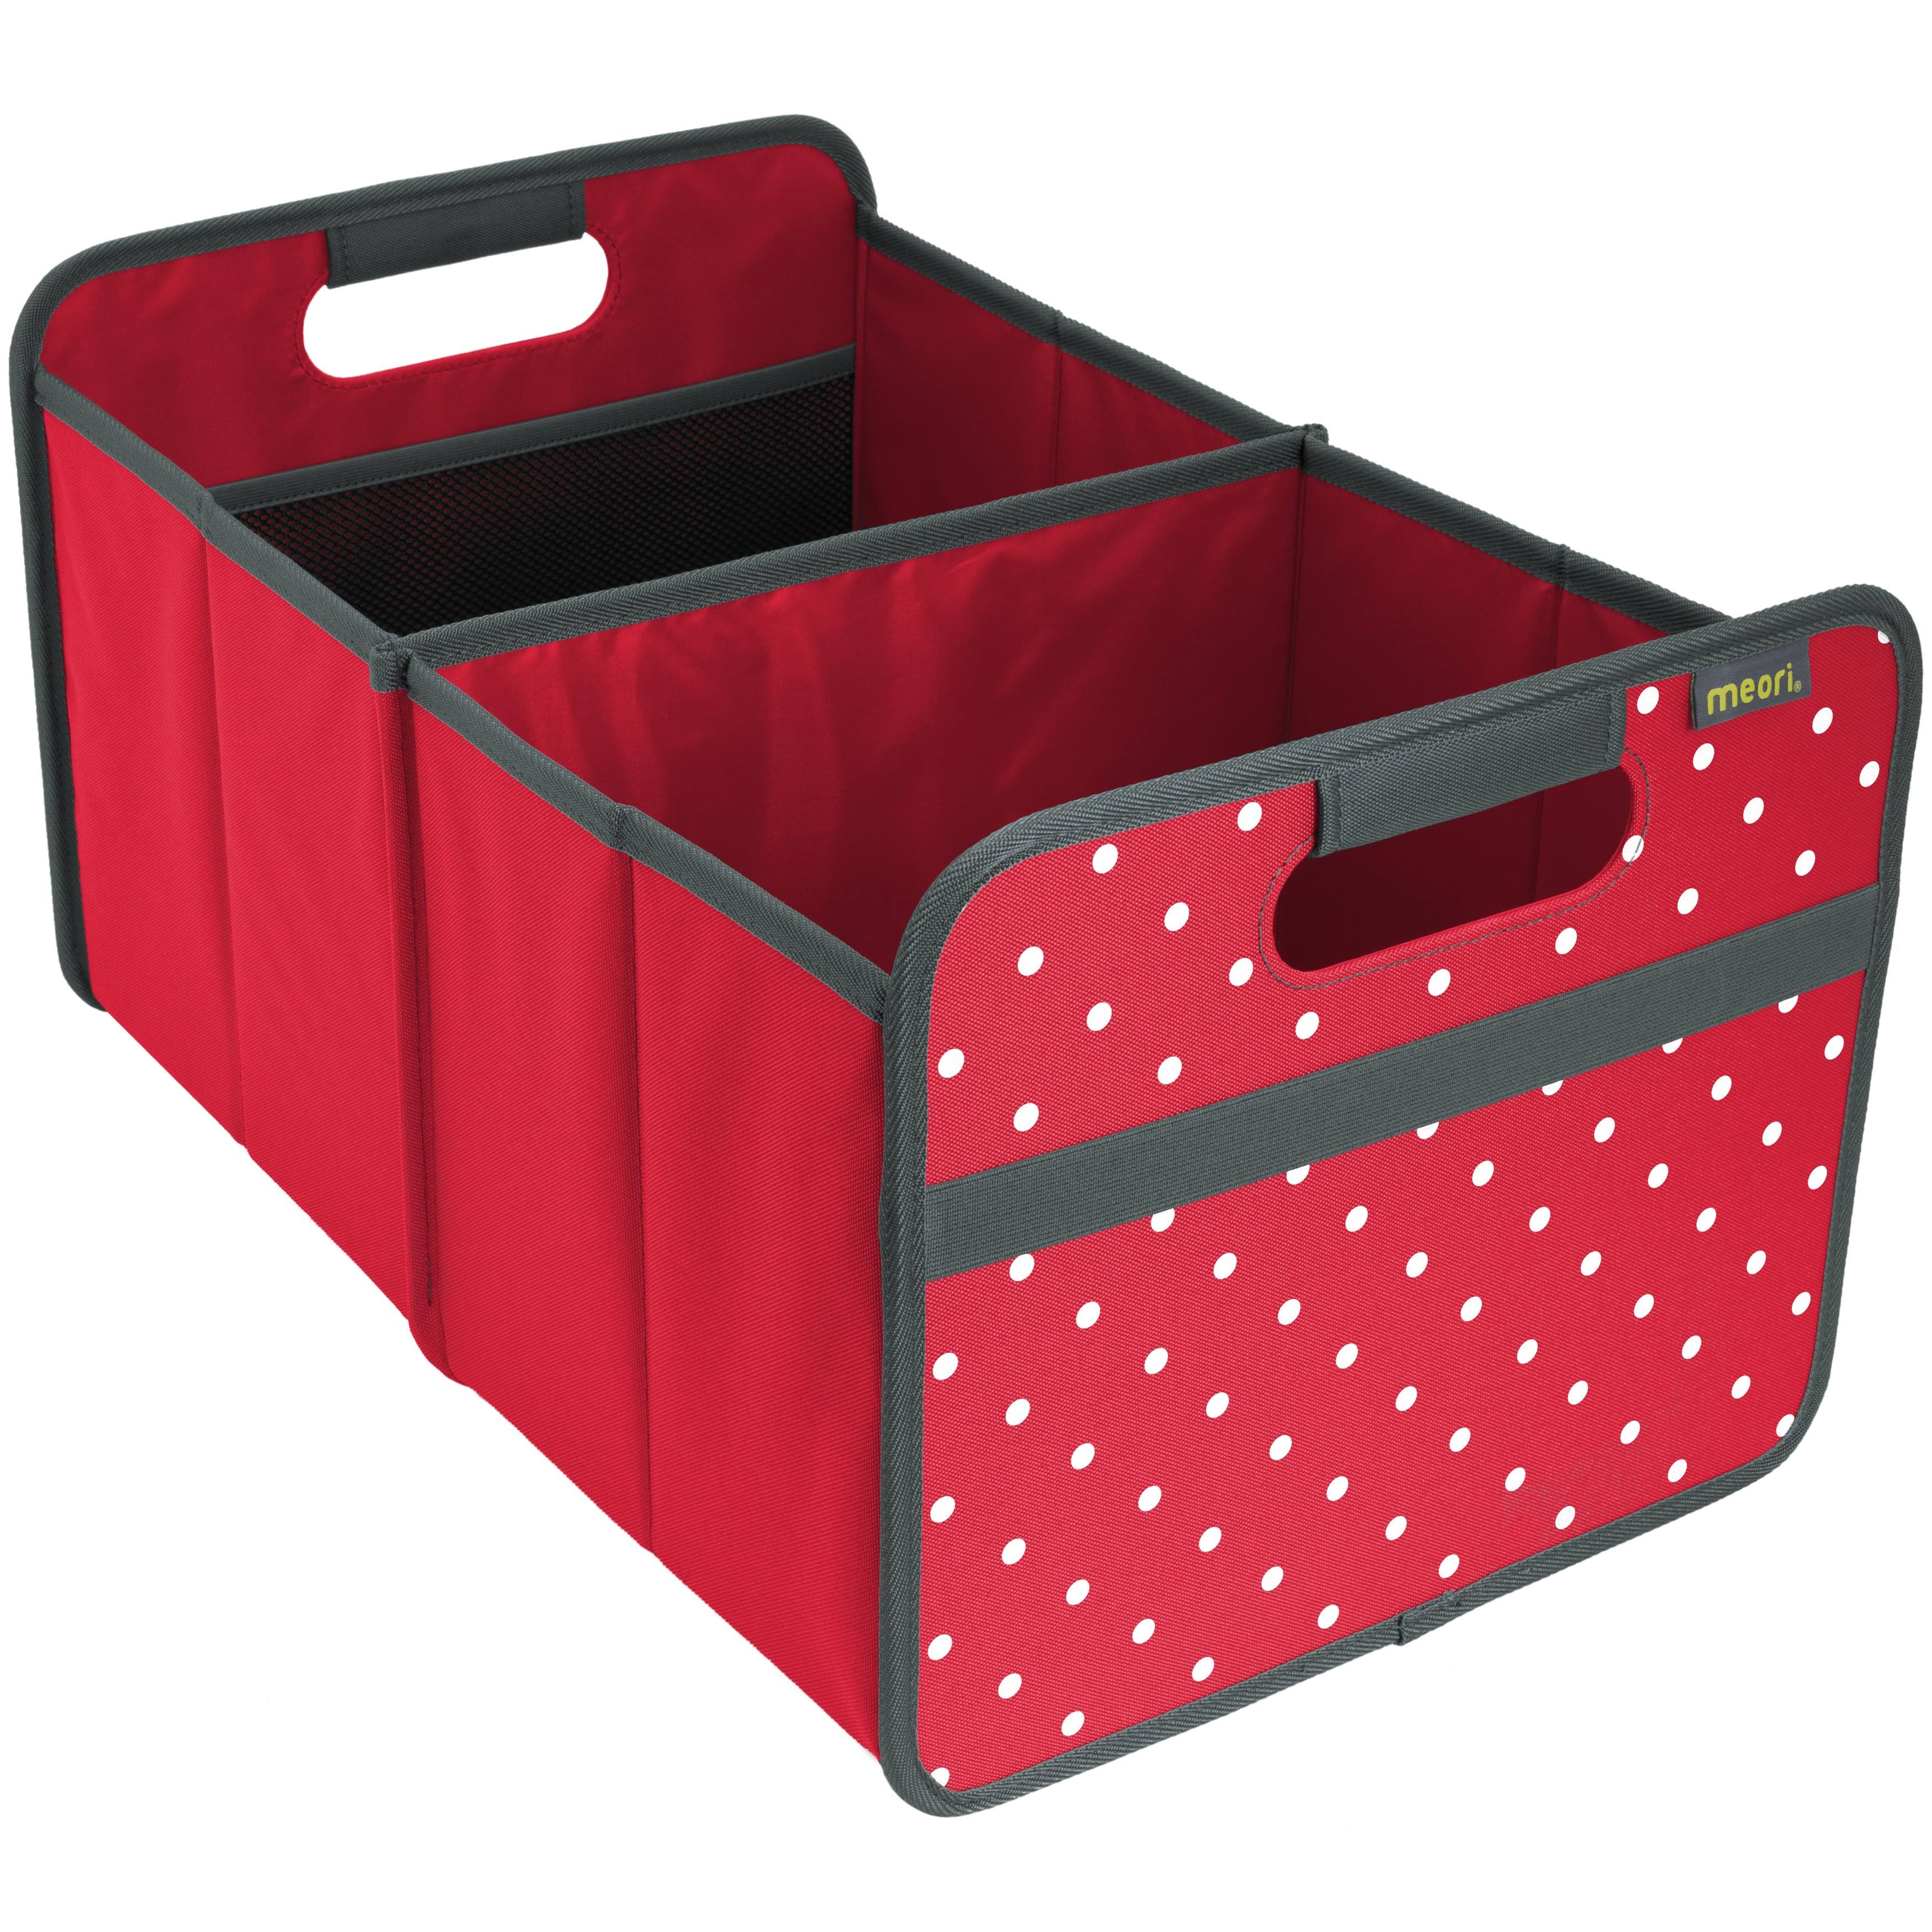 meori Foldable Box Large -Hibiscus Red Dots